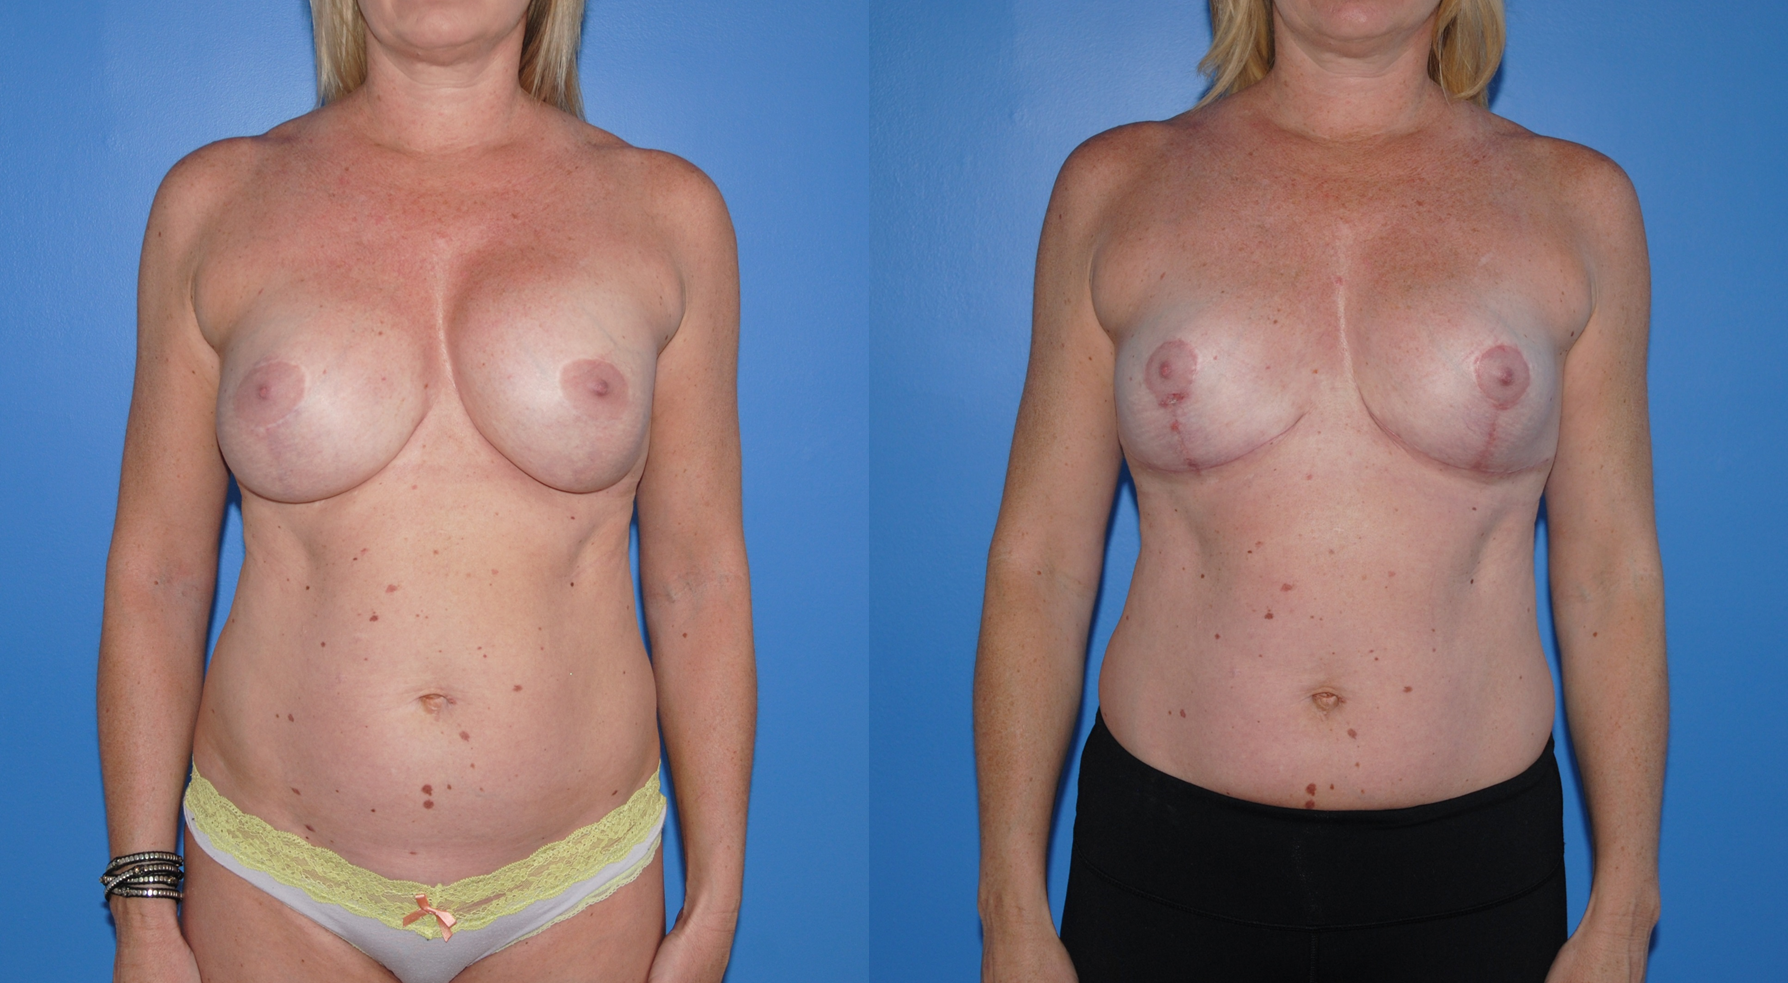 Downsizing Implants and Breast Lift